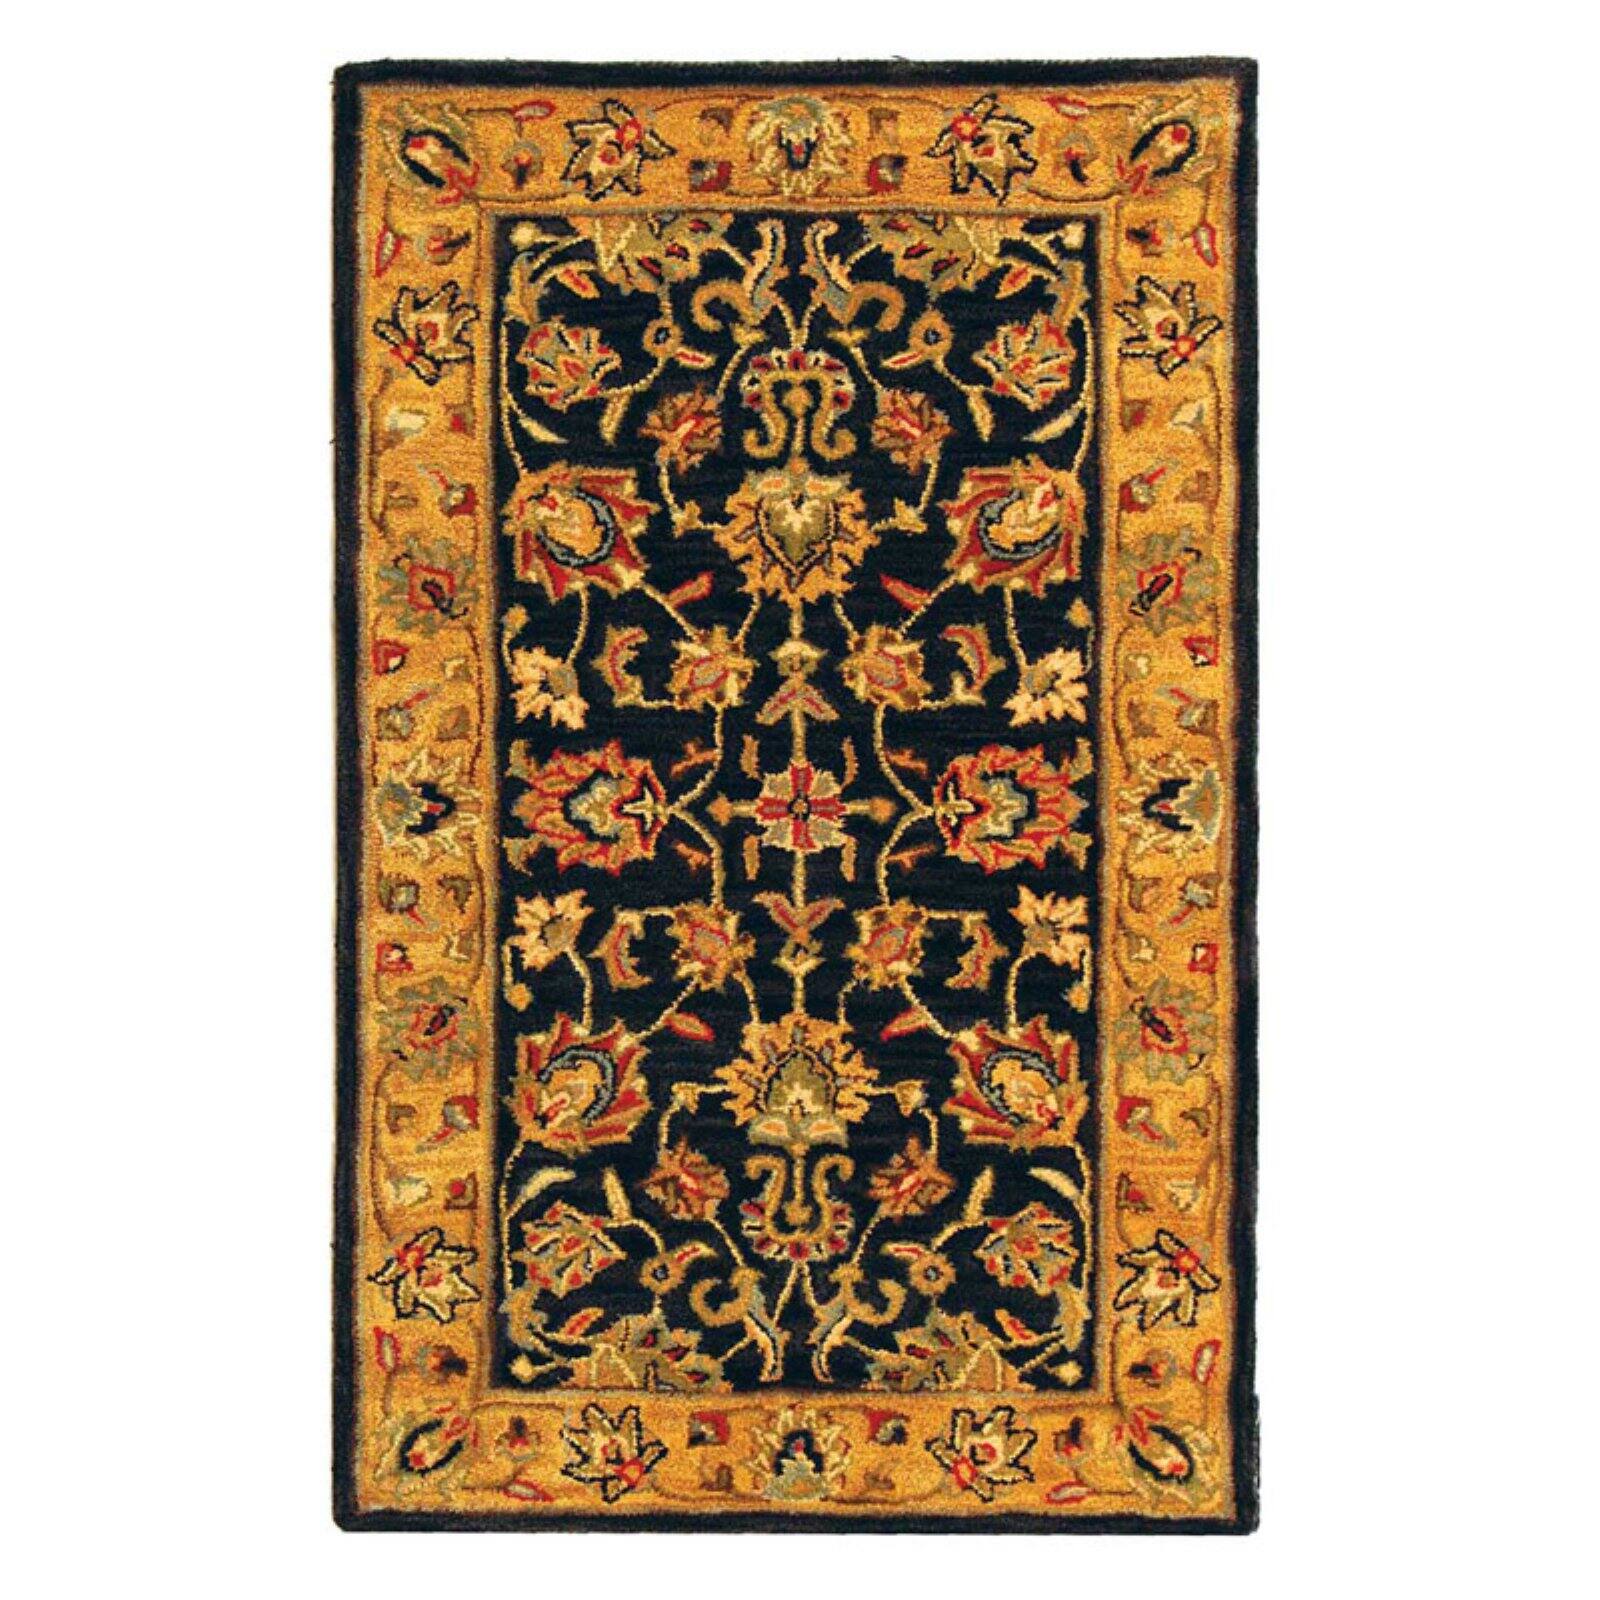 SAFAVIEH Heritage Regis Traditional Wool Area Rug, Charcoal/Gold, 3' x 5' - image 5 of 10